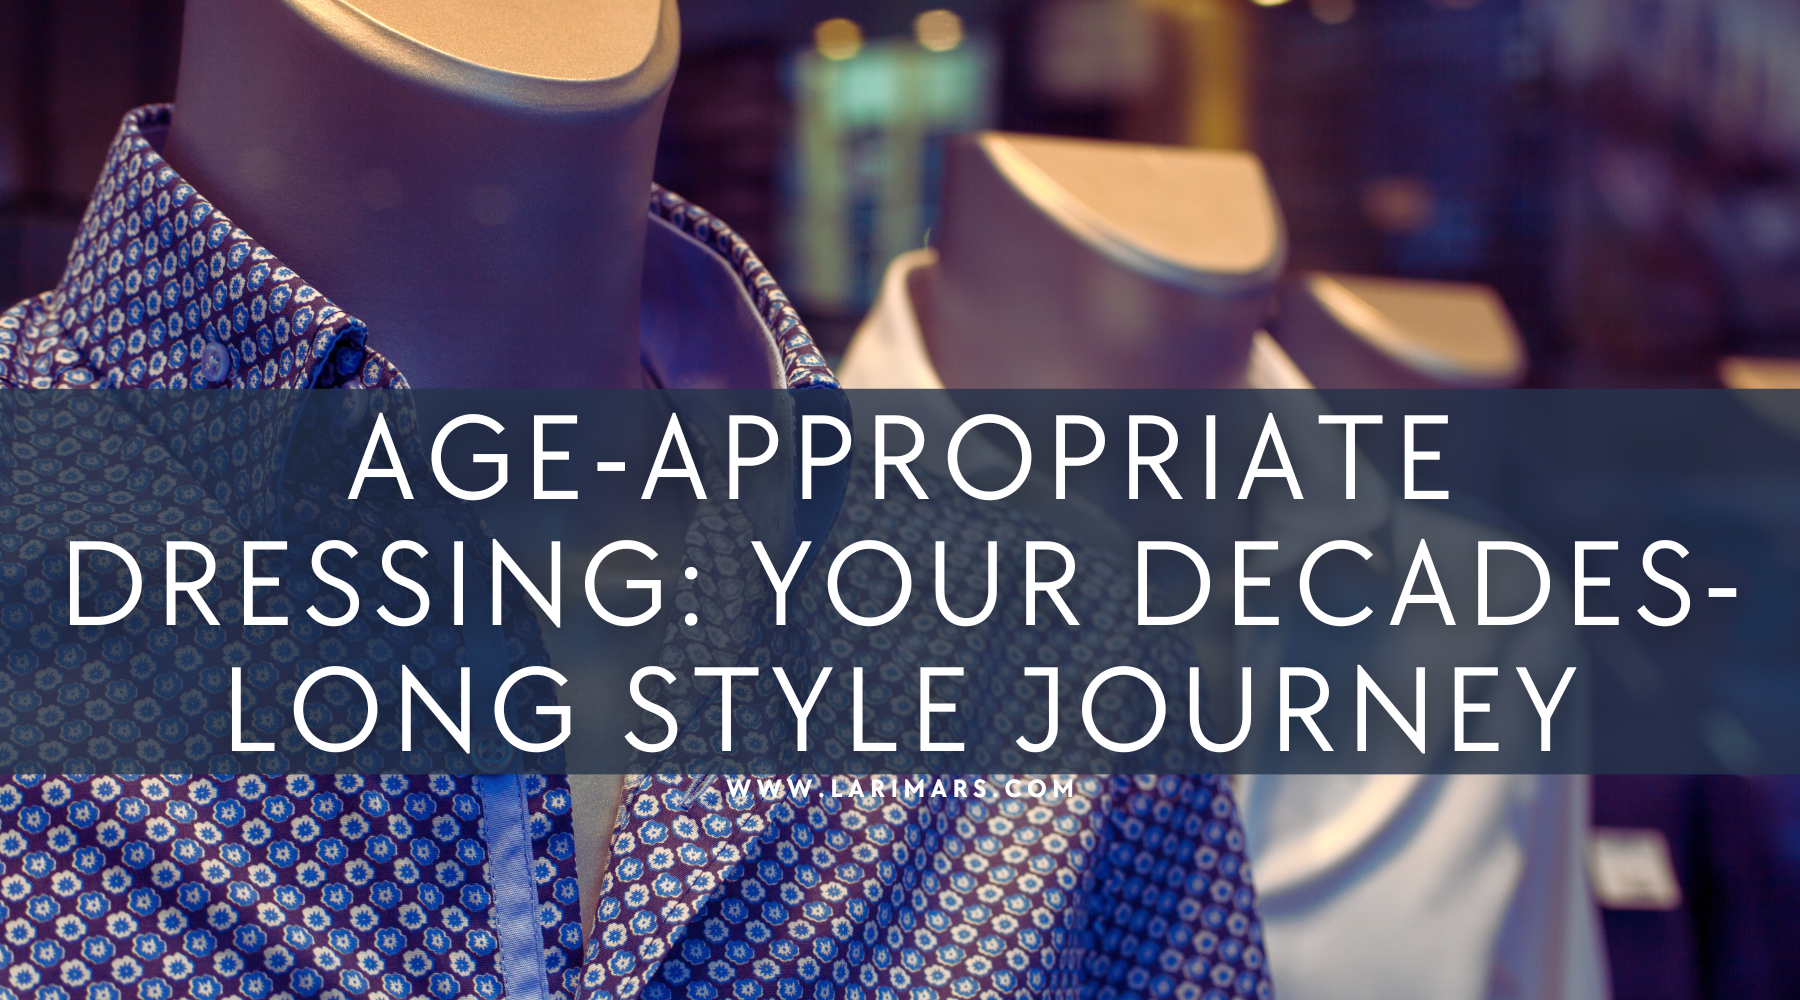 Age-Appropriate Dressing: Your Decades-Long Style Journey